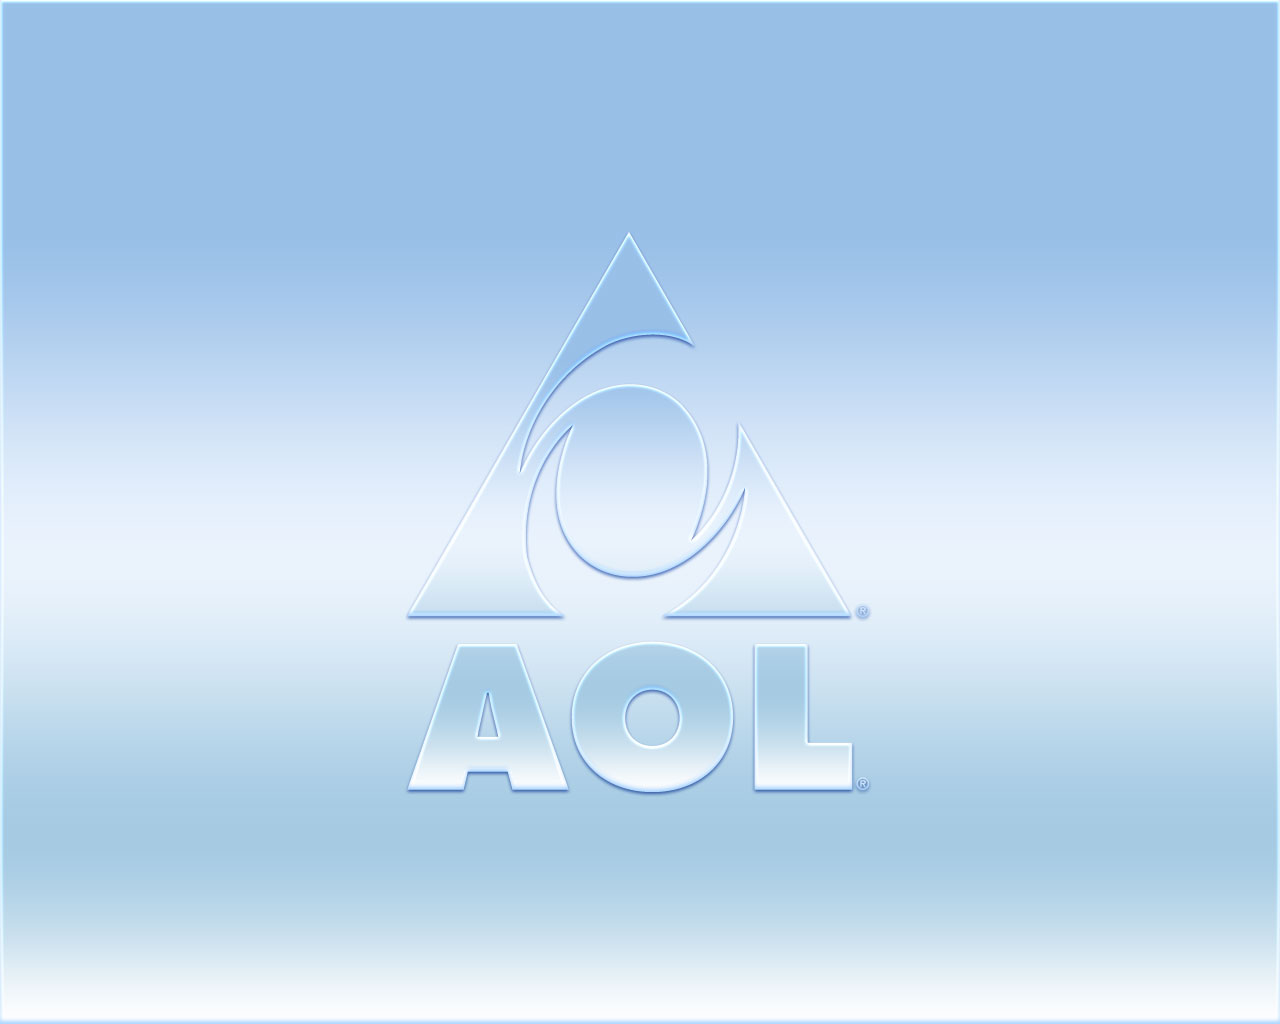 Decorate Your Desktop With Aol Wallpaper